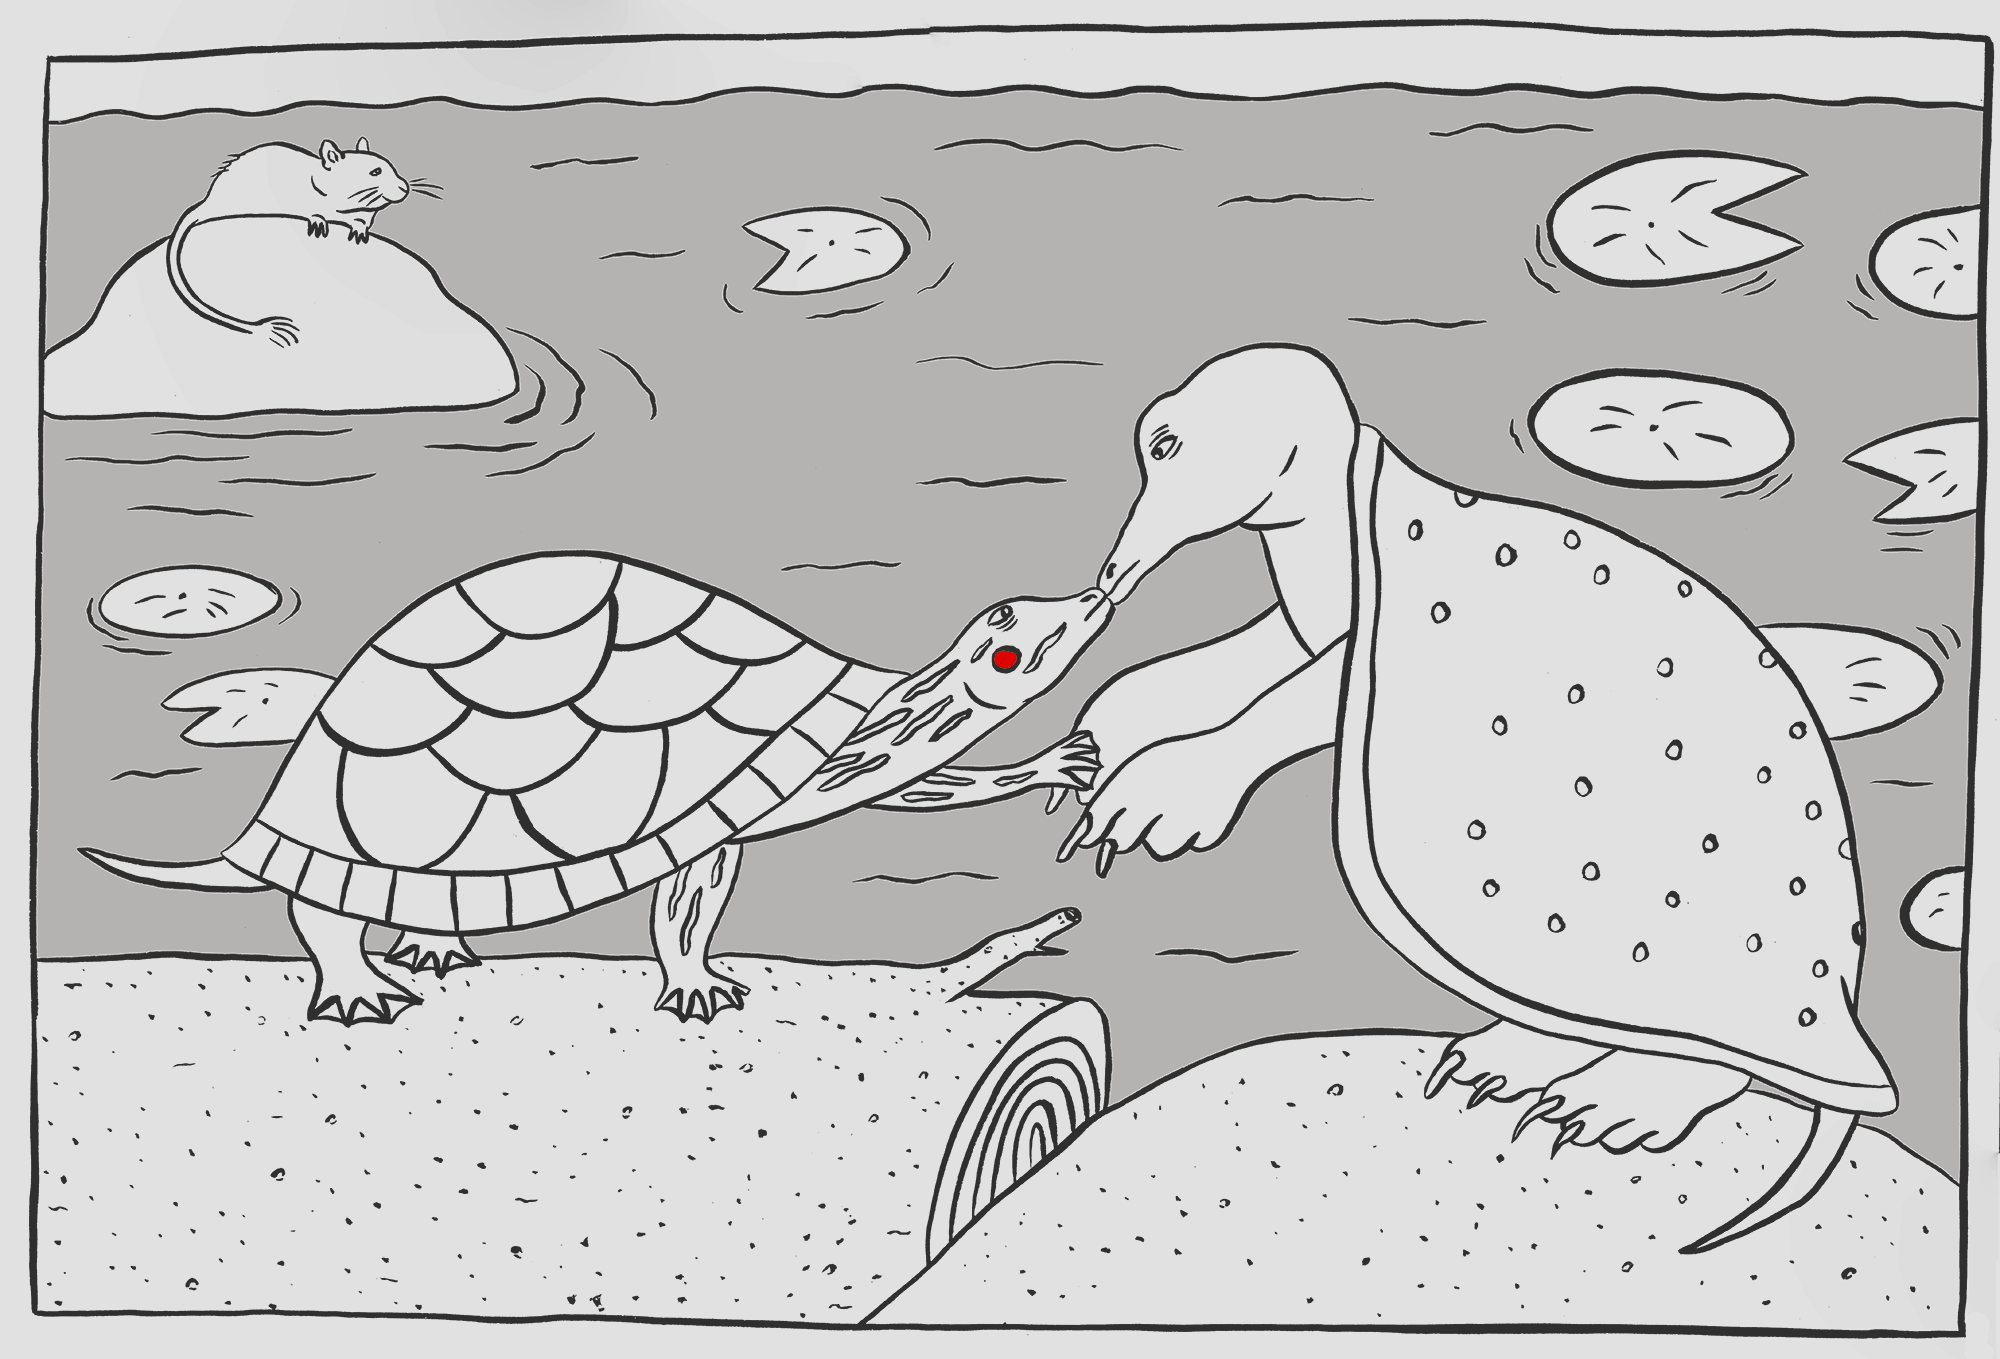 My Cartoon Turtles Say What I Feel image picture